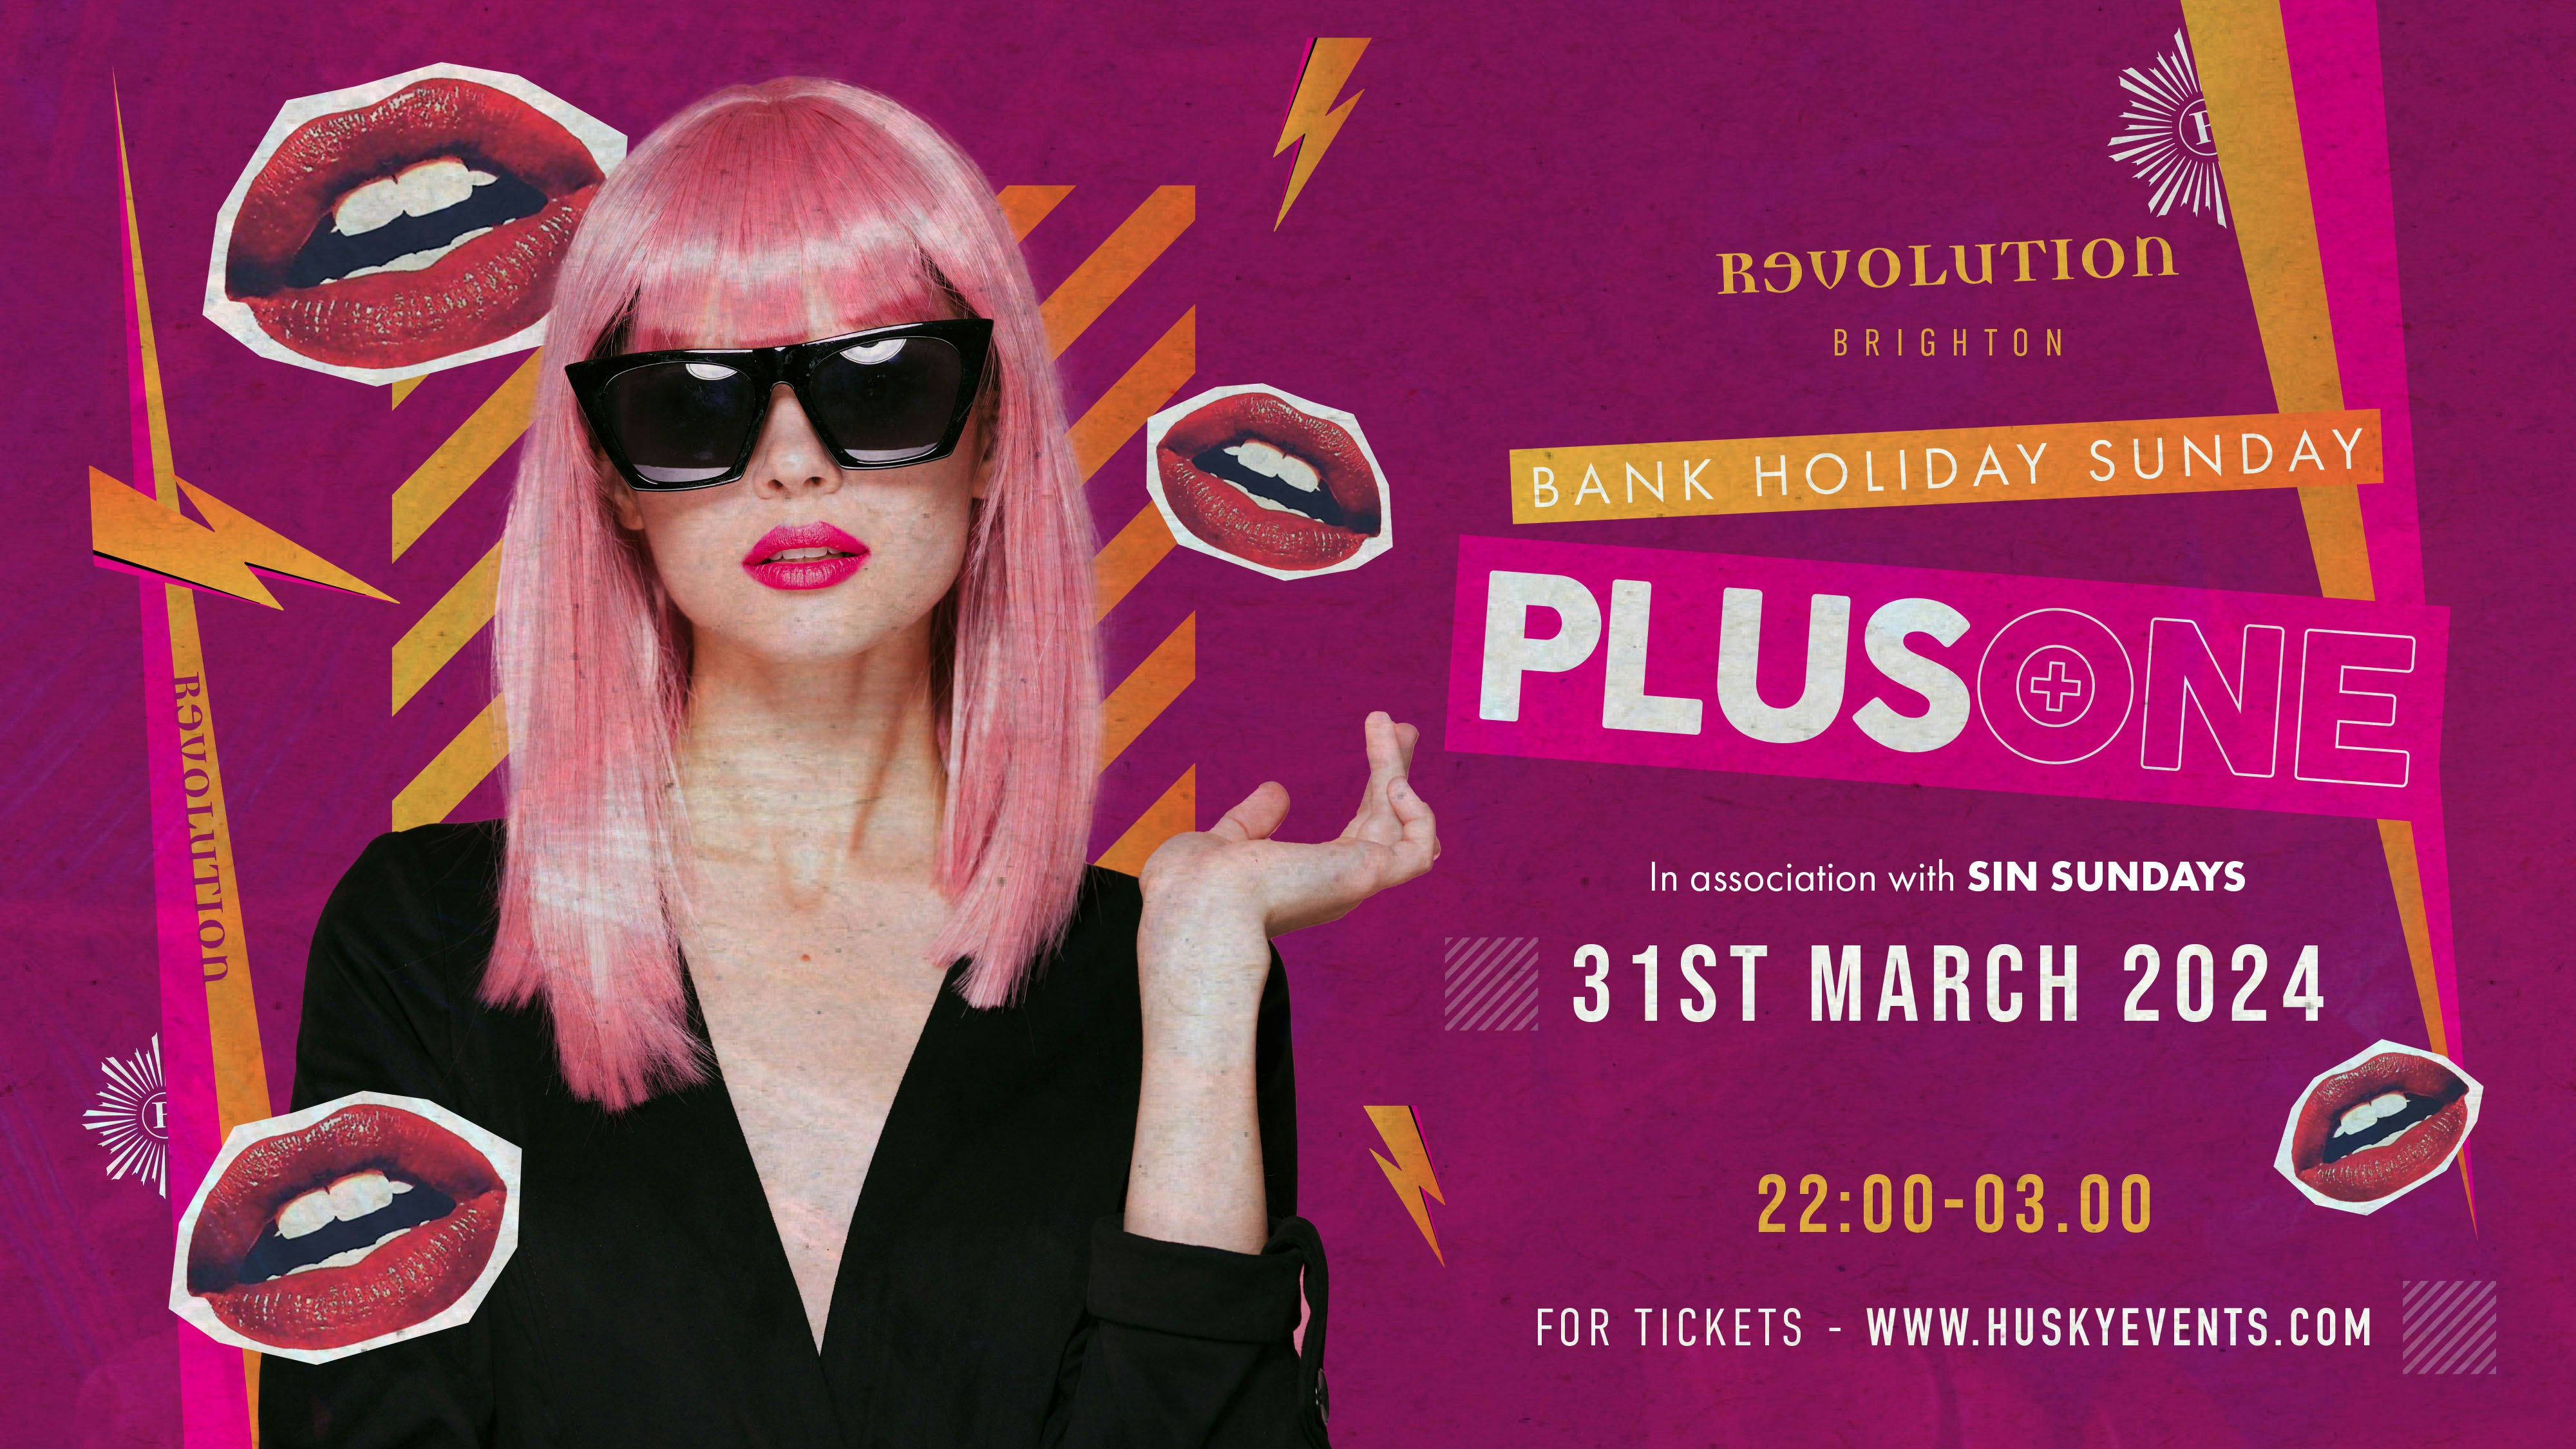 Plus One x Revolution ➤ Easter Bank Holiday Sunday ➤ 31.03.24